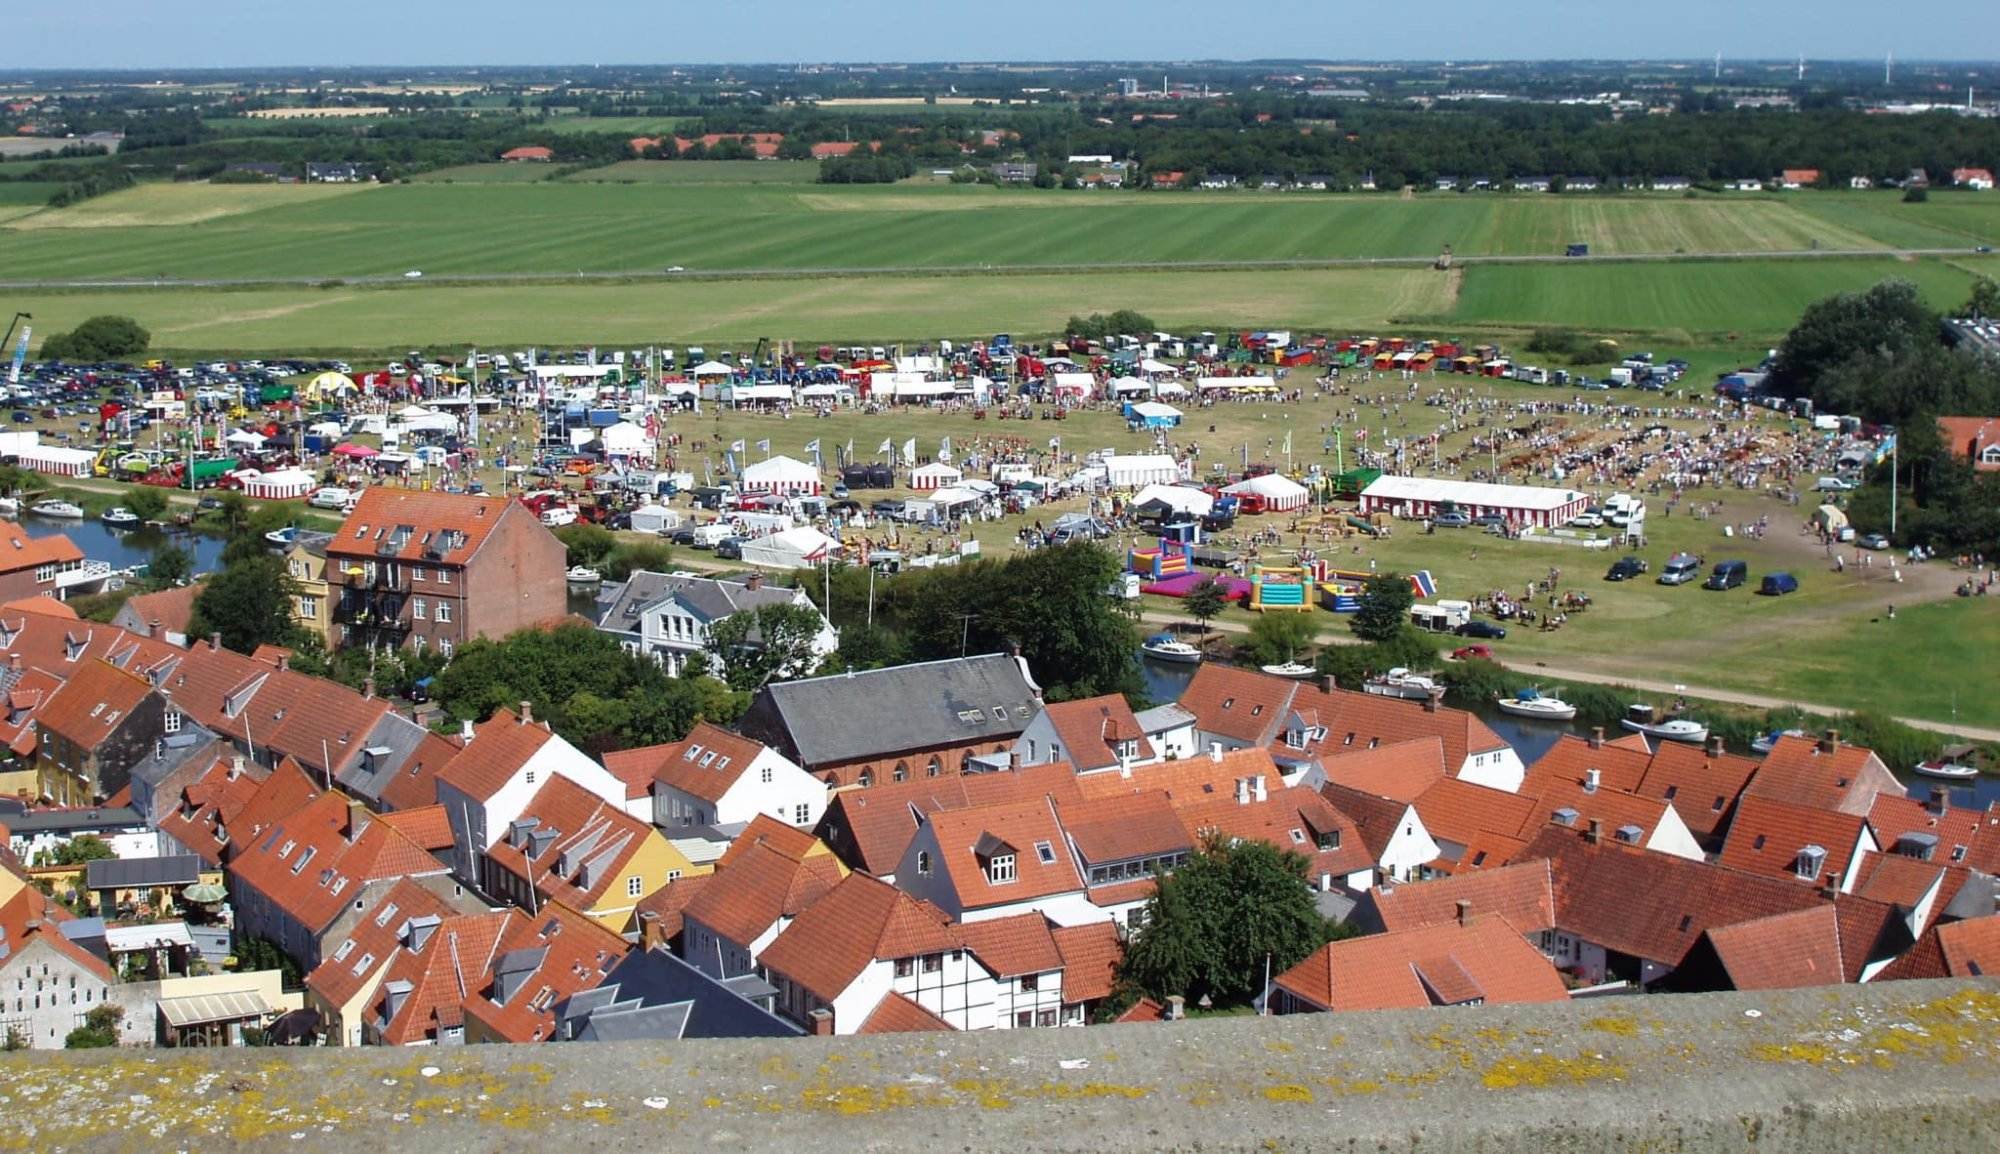 Ribe during the yearly "Ribe Dyrskue SammeDag", an animal show event.